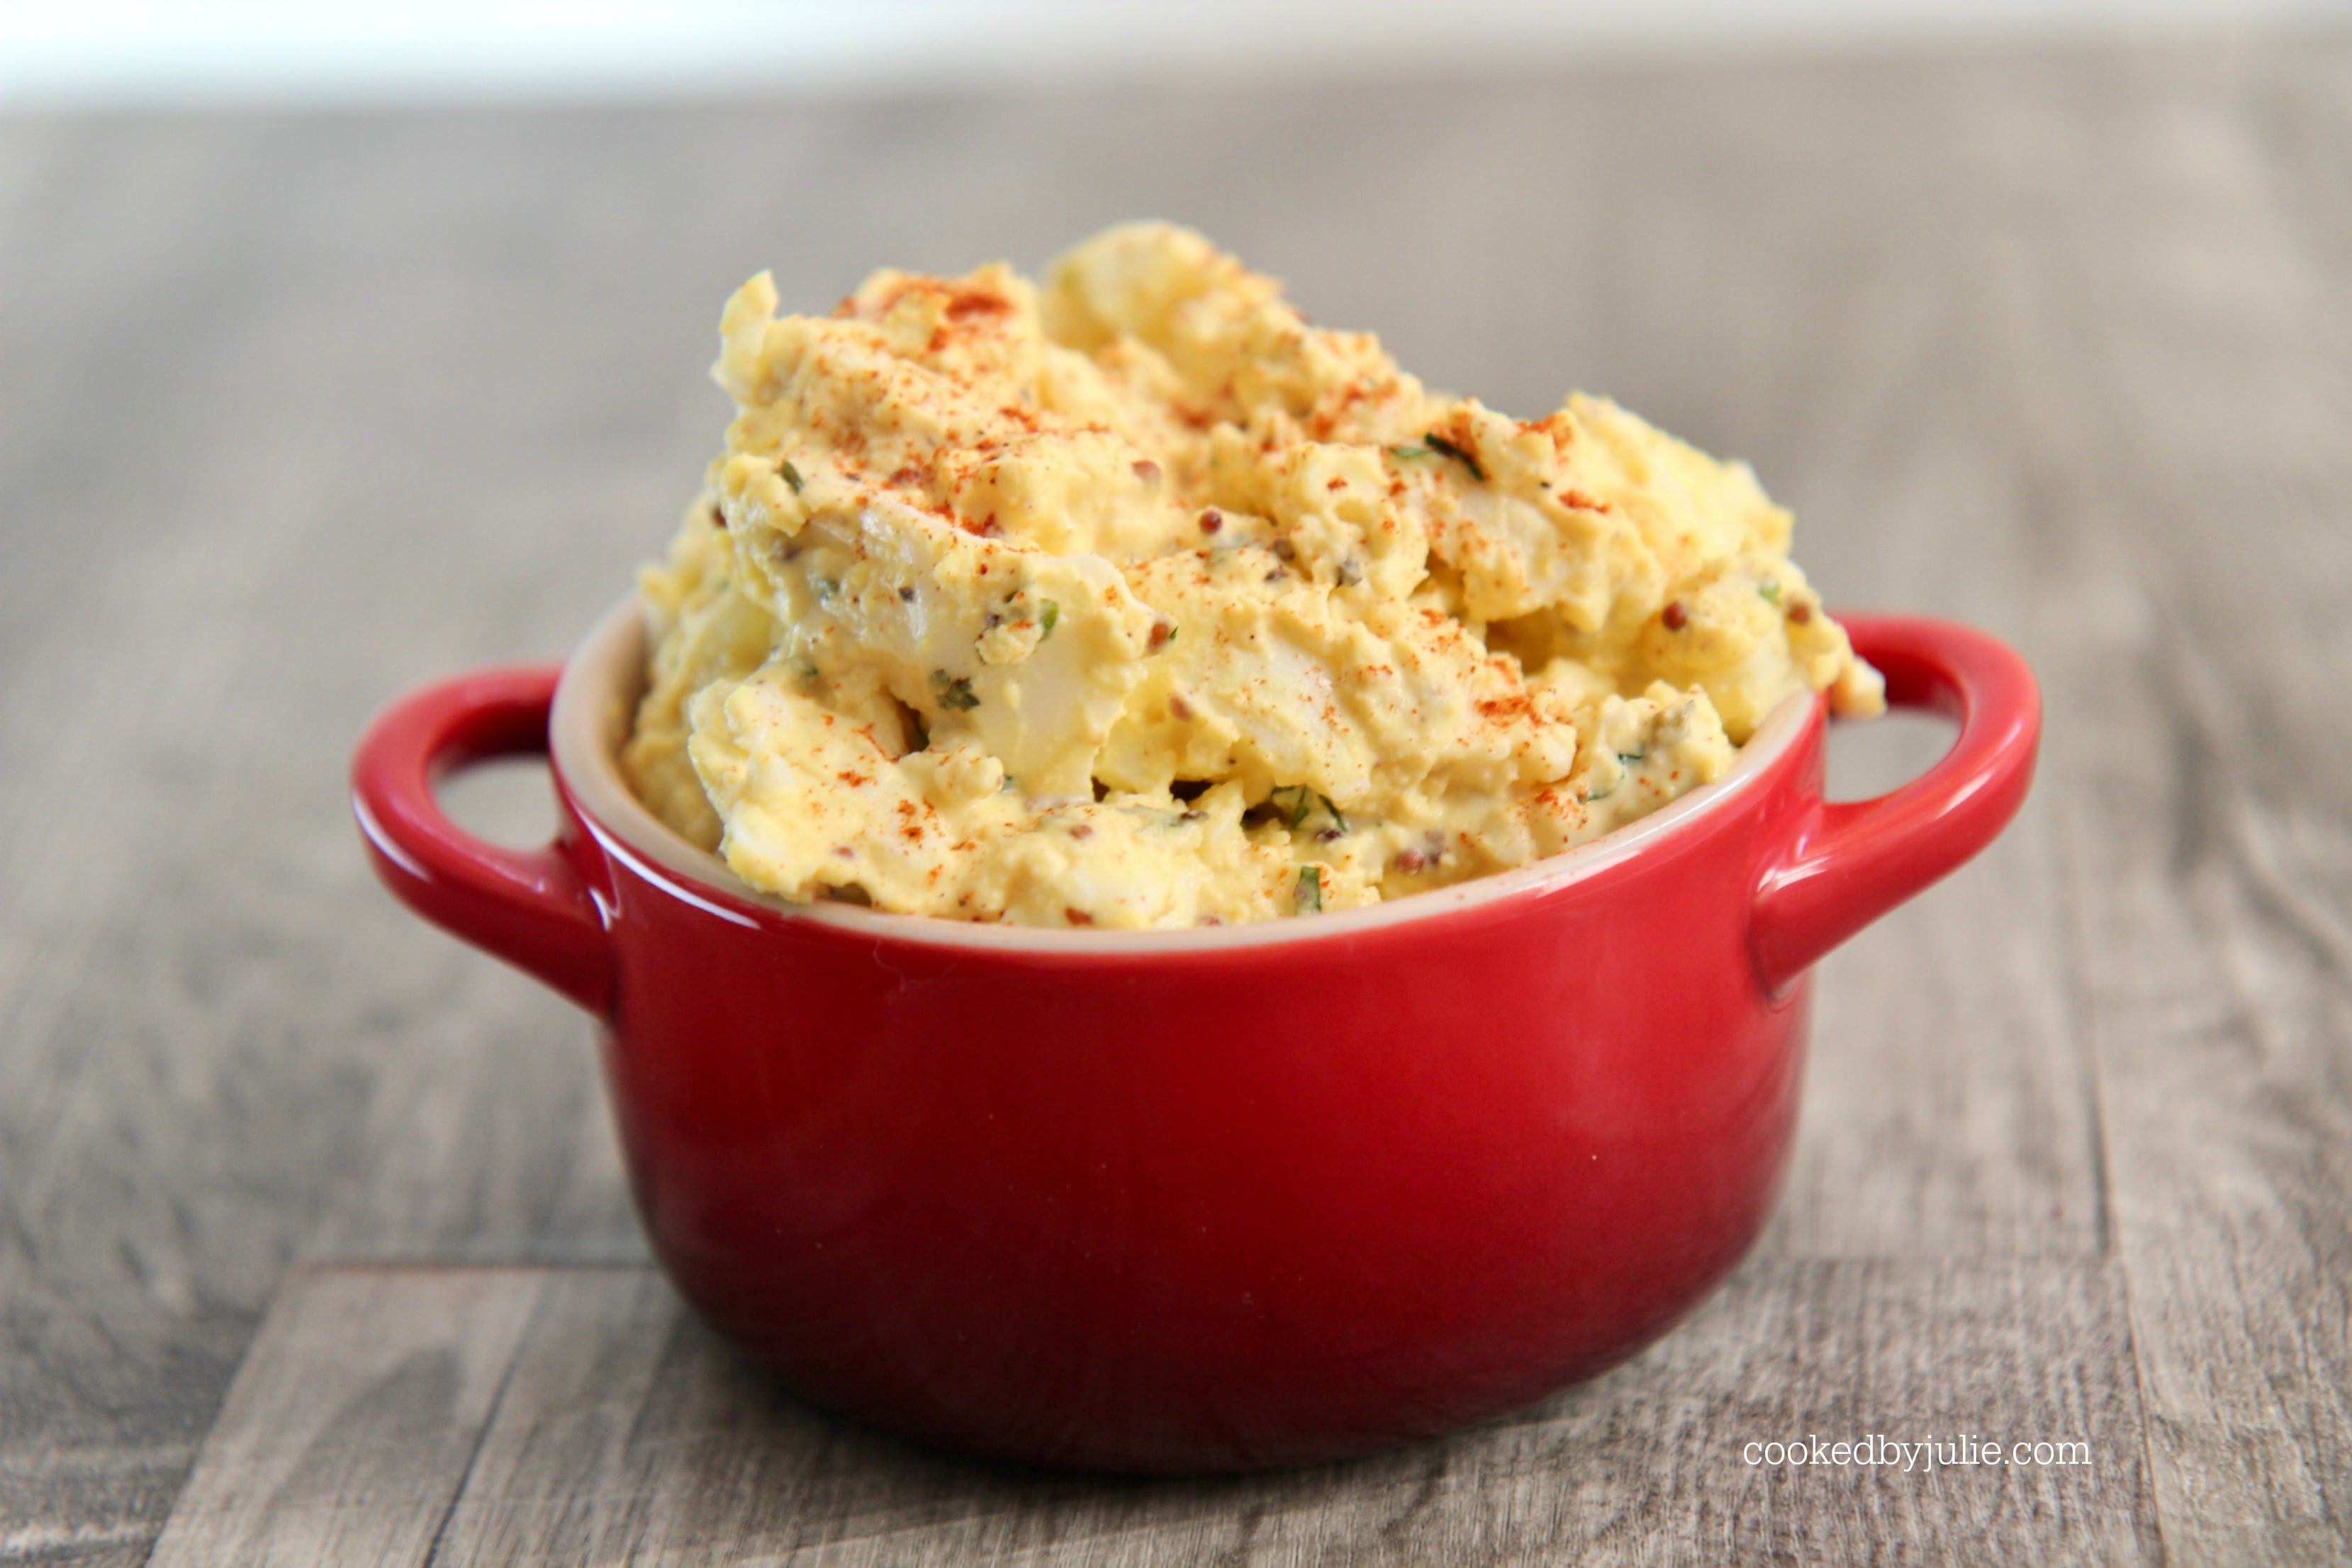 Sprinkle this delicious egg salad with a pinch of paprika for a hint of spice.